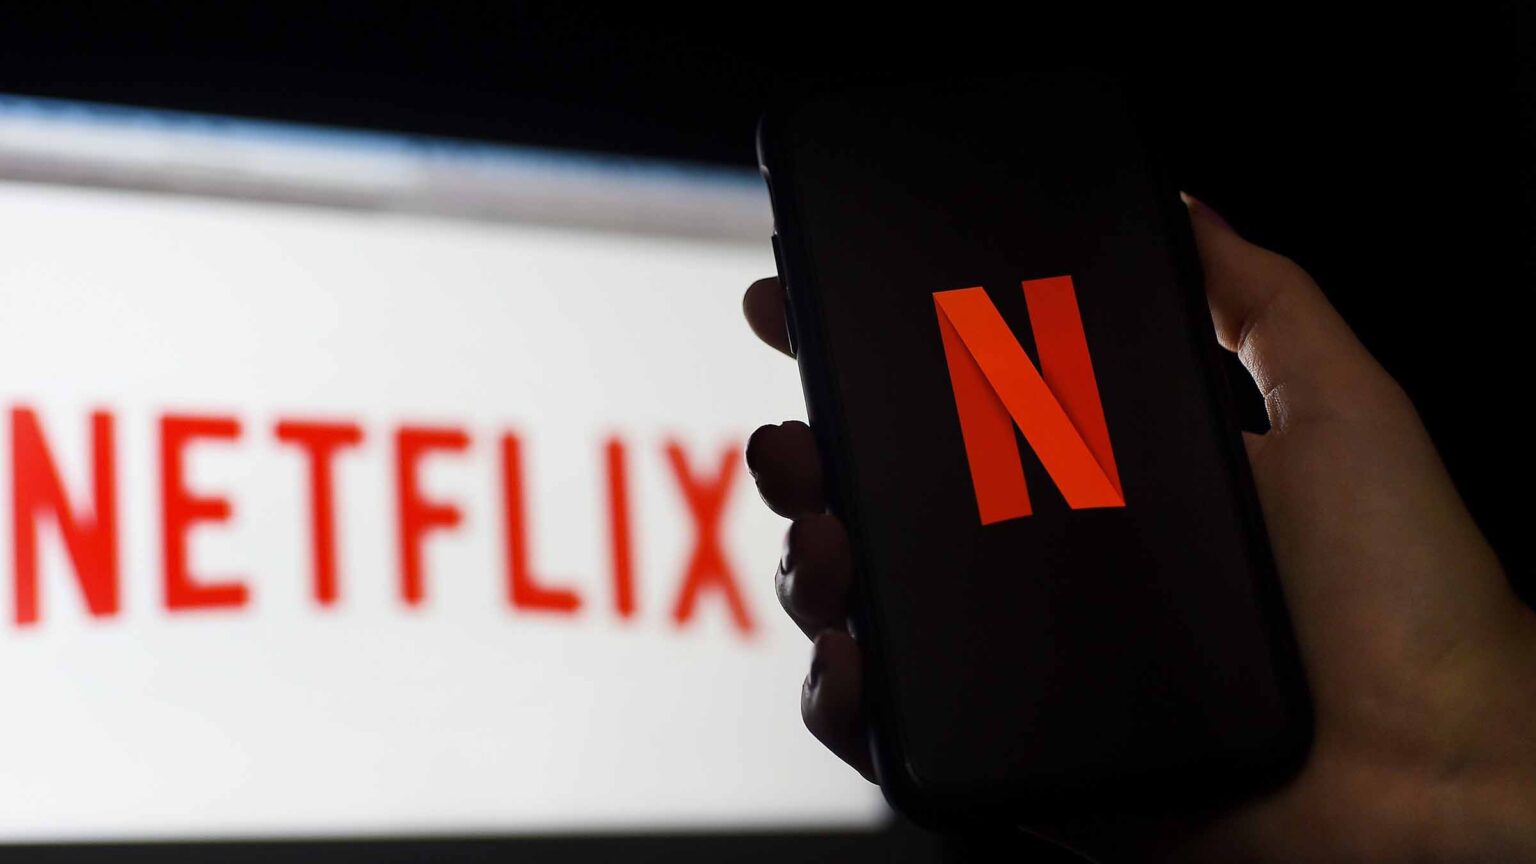 Netflix was one of the first streaming sites around and has thus become the most common subscription. Here's how to subscribe for free.